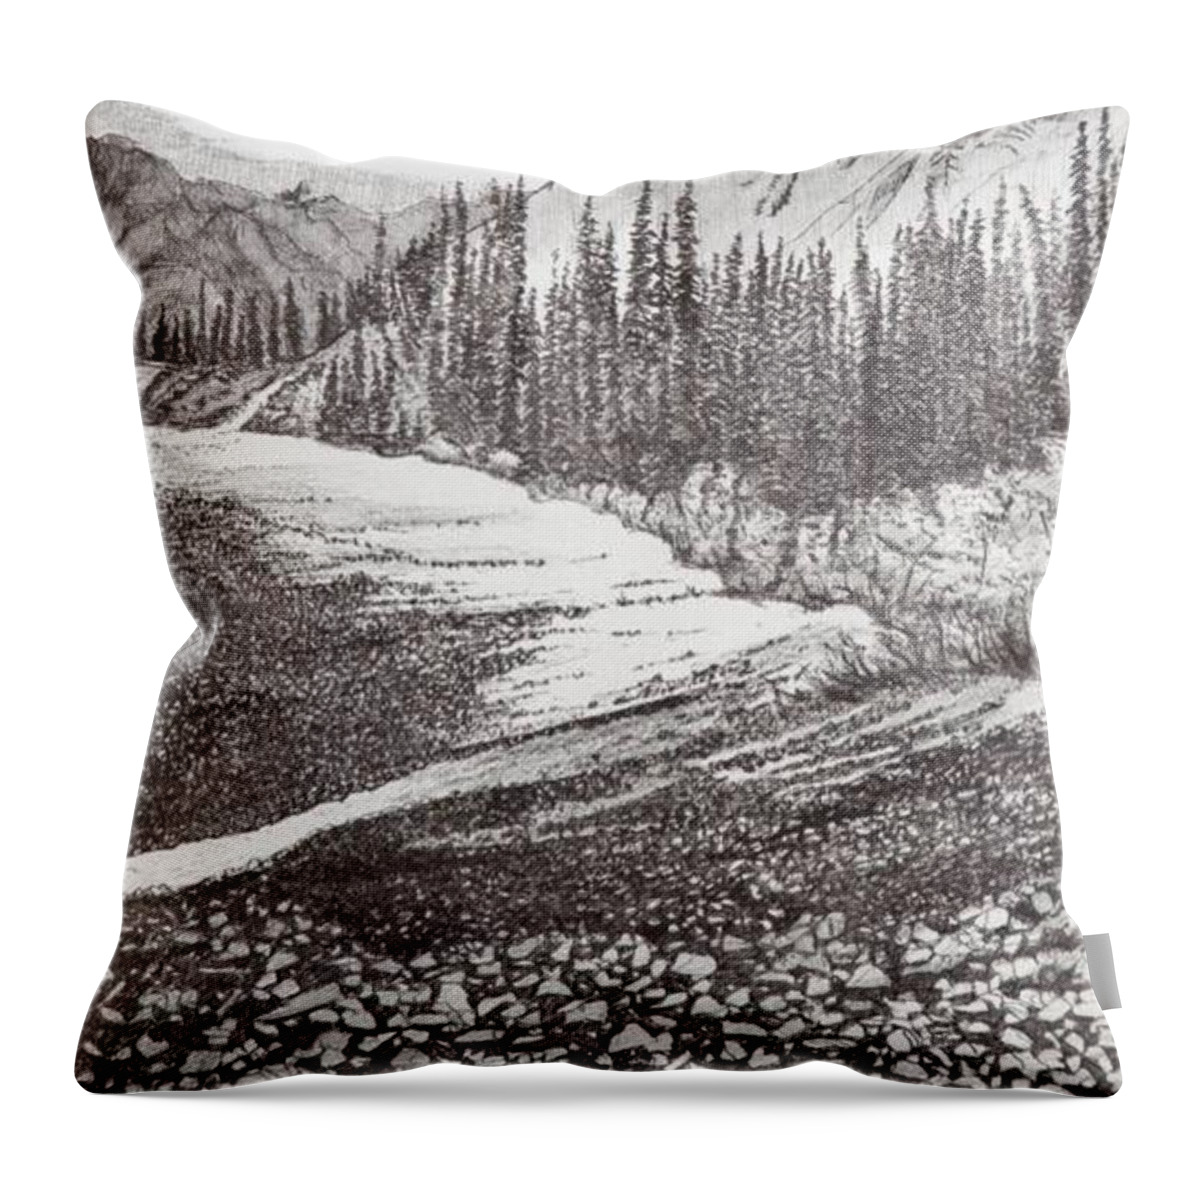 Pen And Ink Throw Pillow featuring the drawing Dry Riverbed by Betsy Carlson Cross